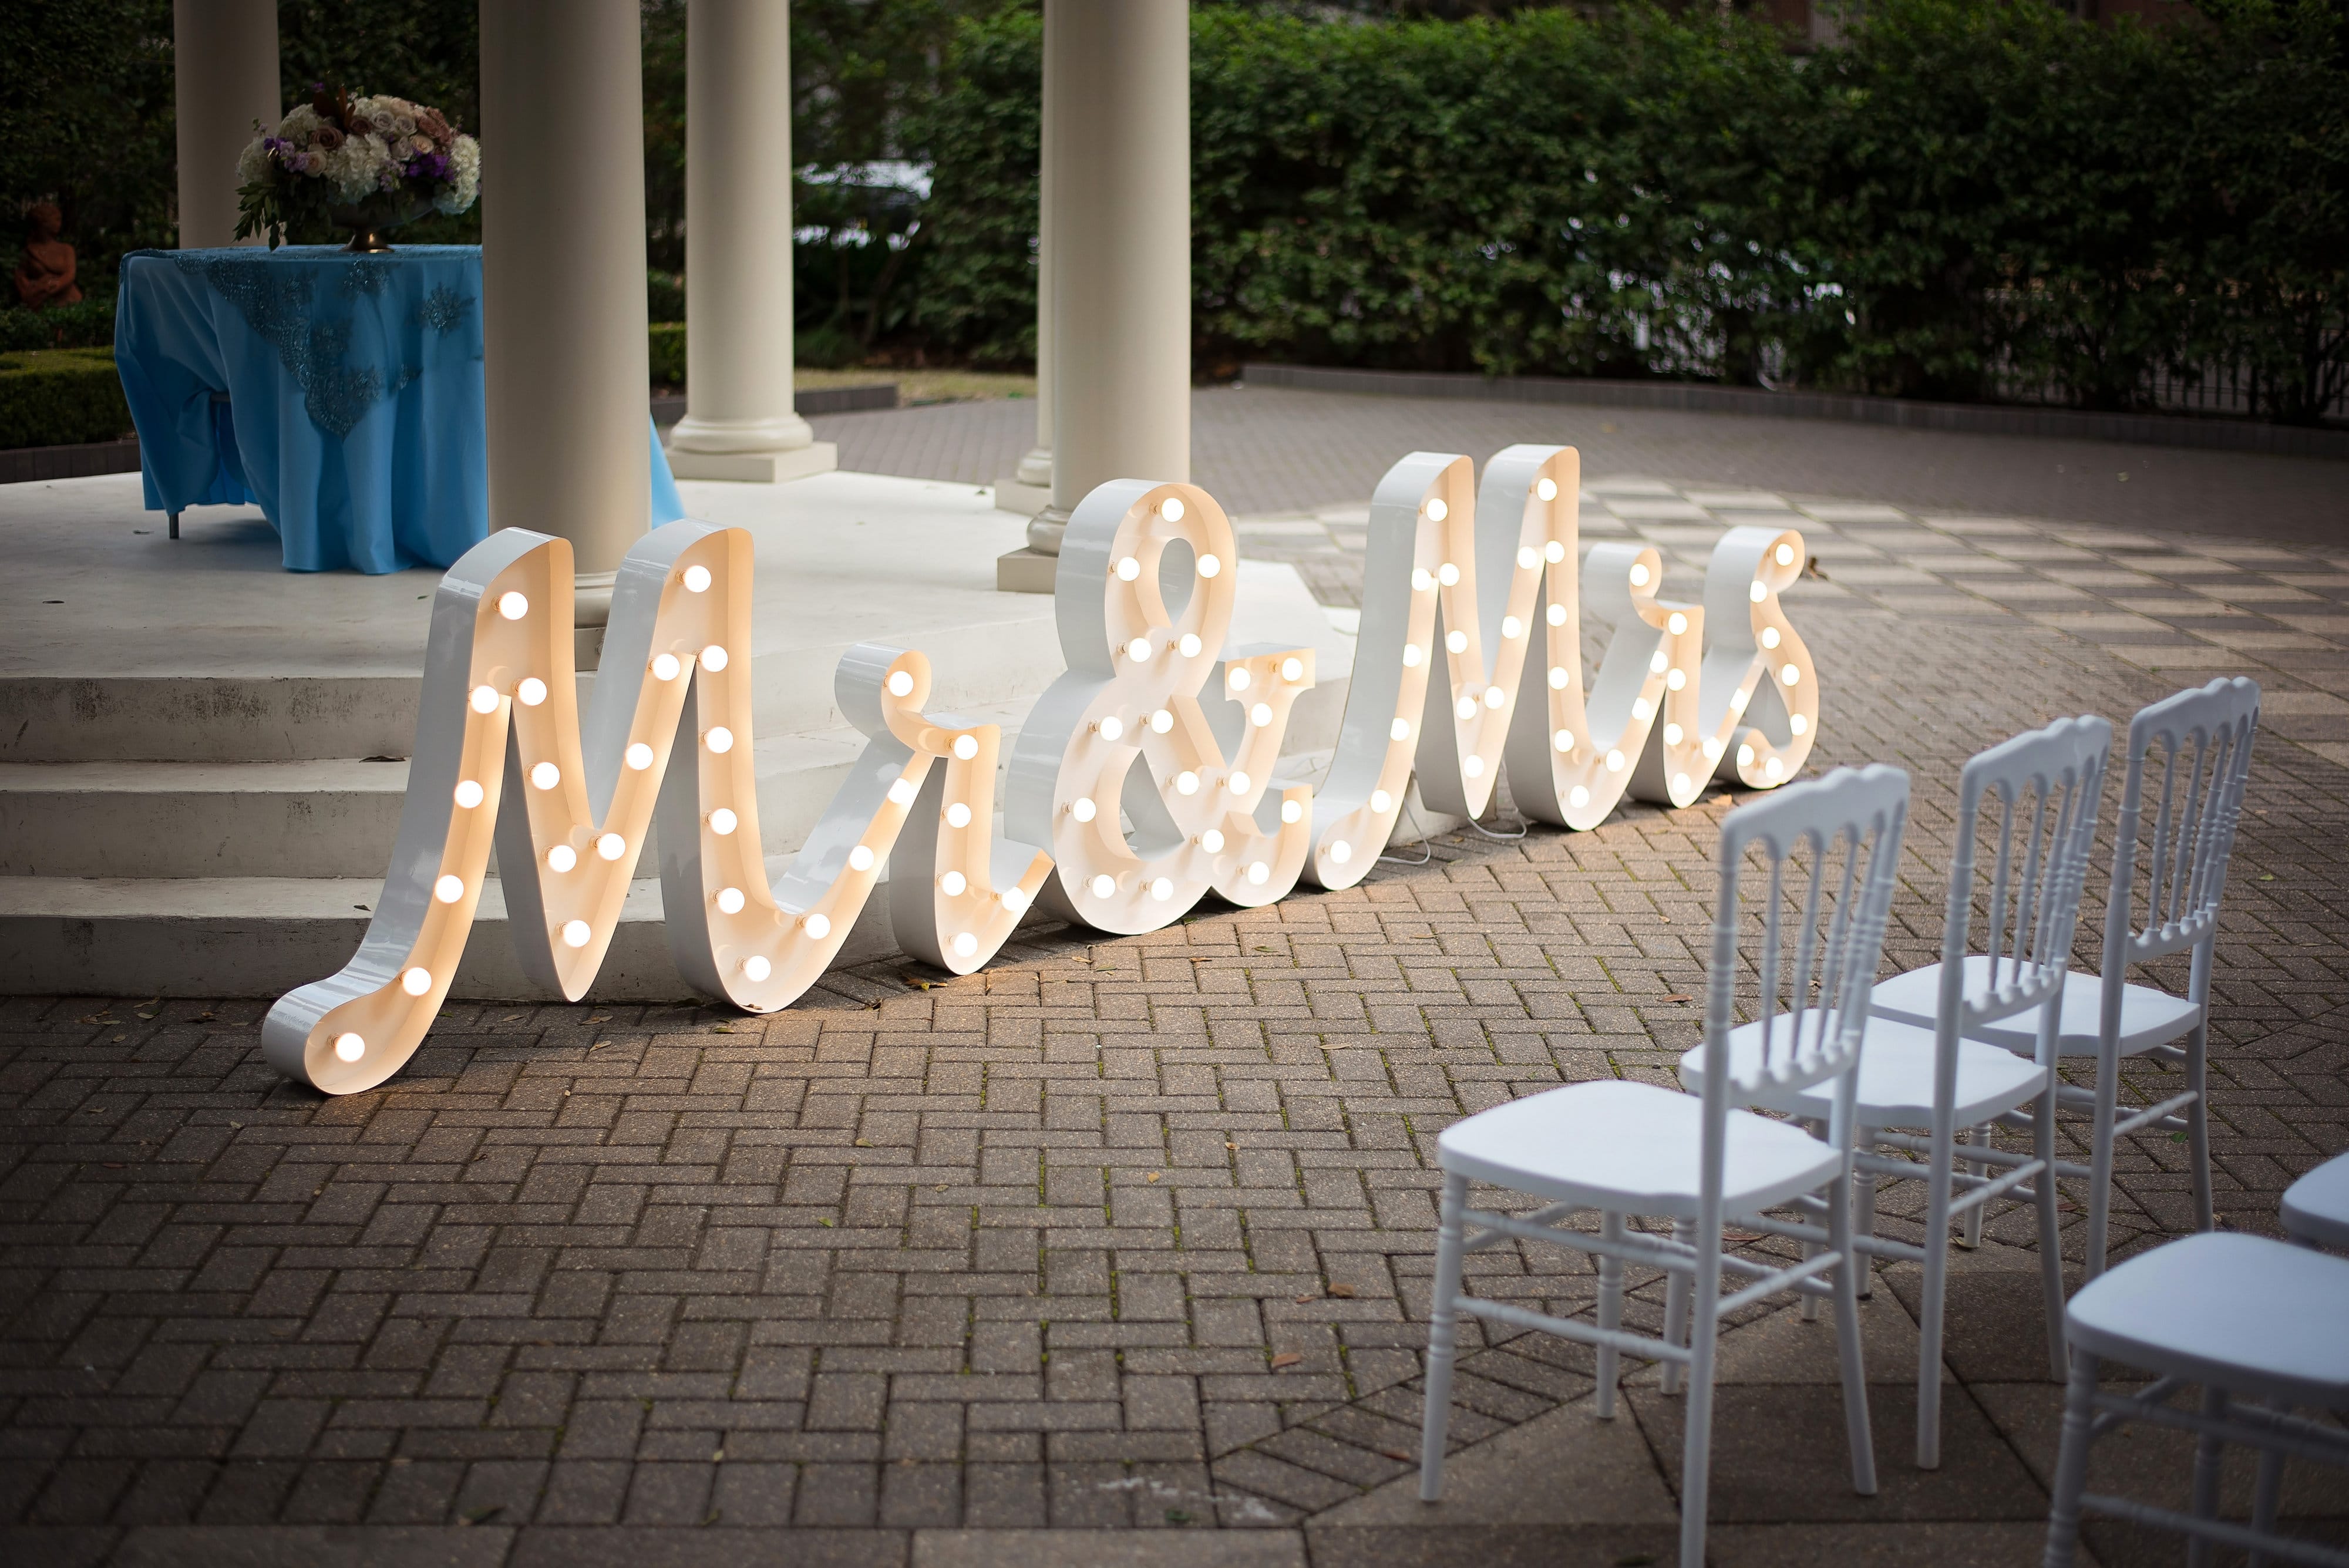 Announce your new union in lights! This script “Mr&Mrs” marquee is available from True Value Rental. Photo by The Crawfords.